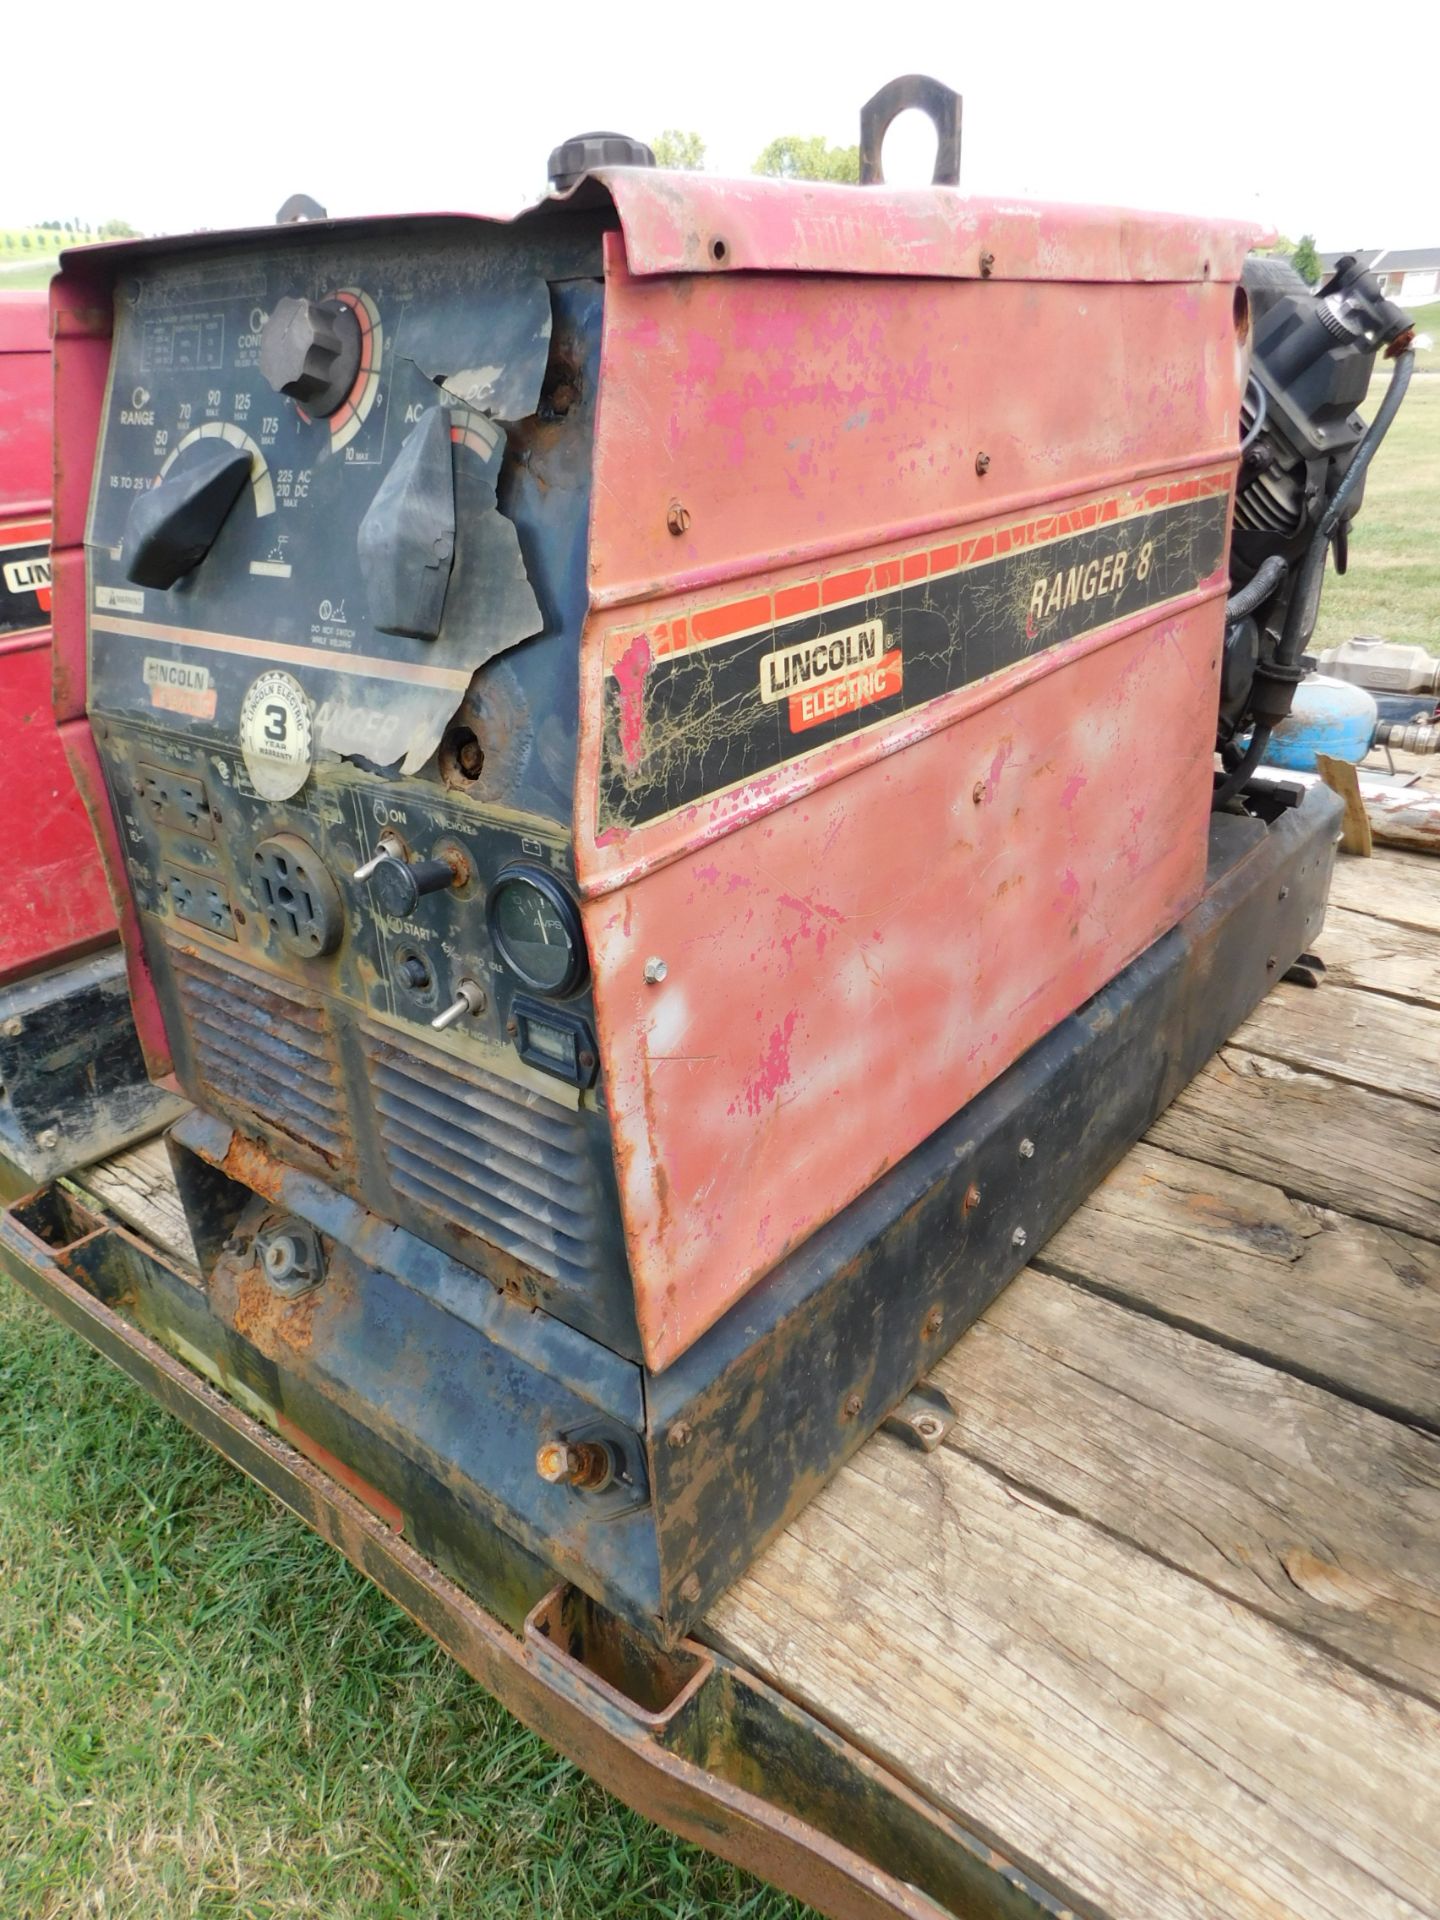 Lincoln Ranger 8 Gas-Powered Welder/Generator, SN NA, 865 hours, Not in Running Condition - Image 7 of 8